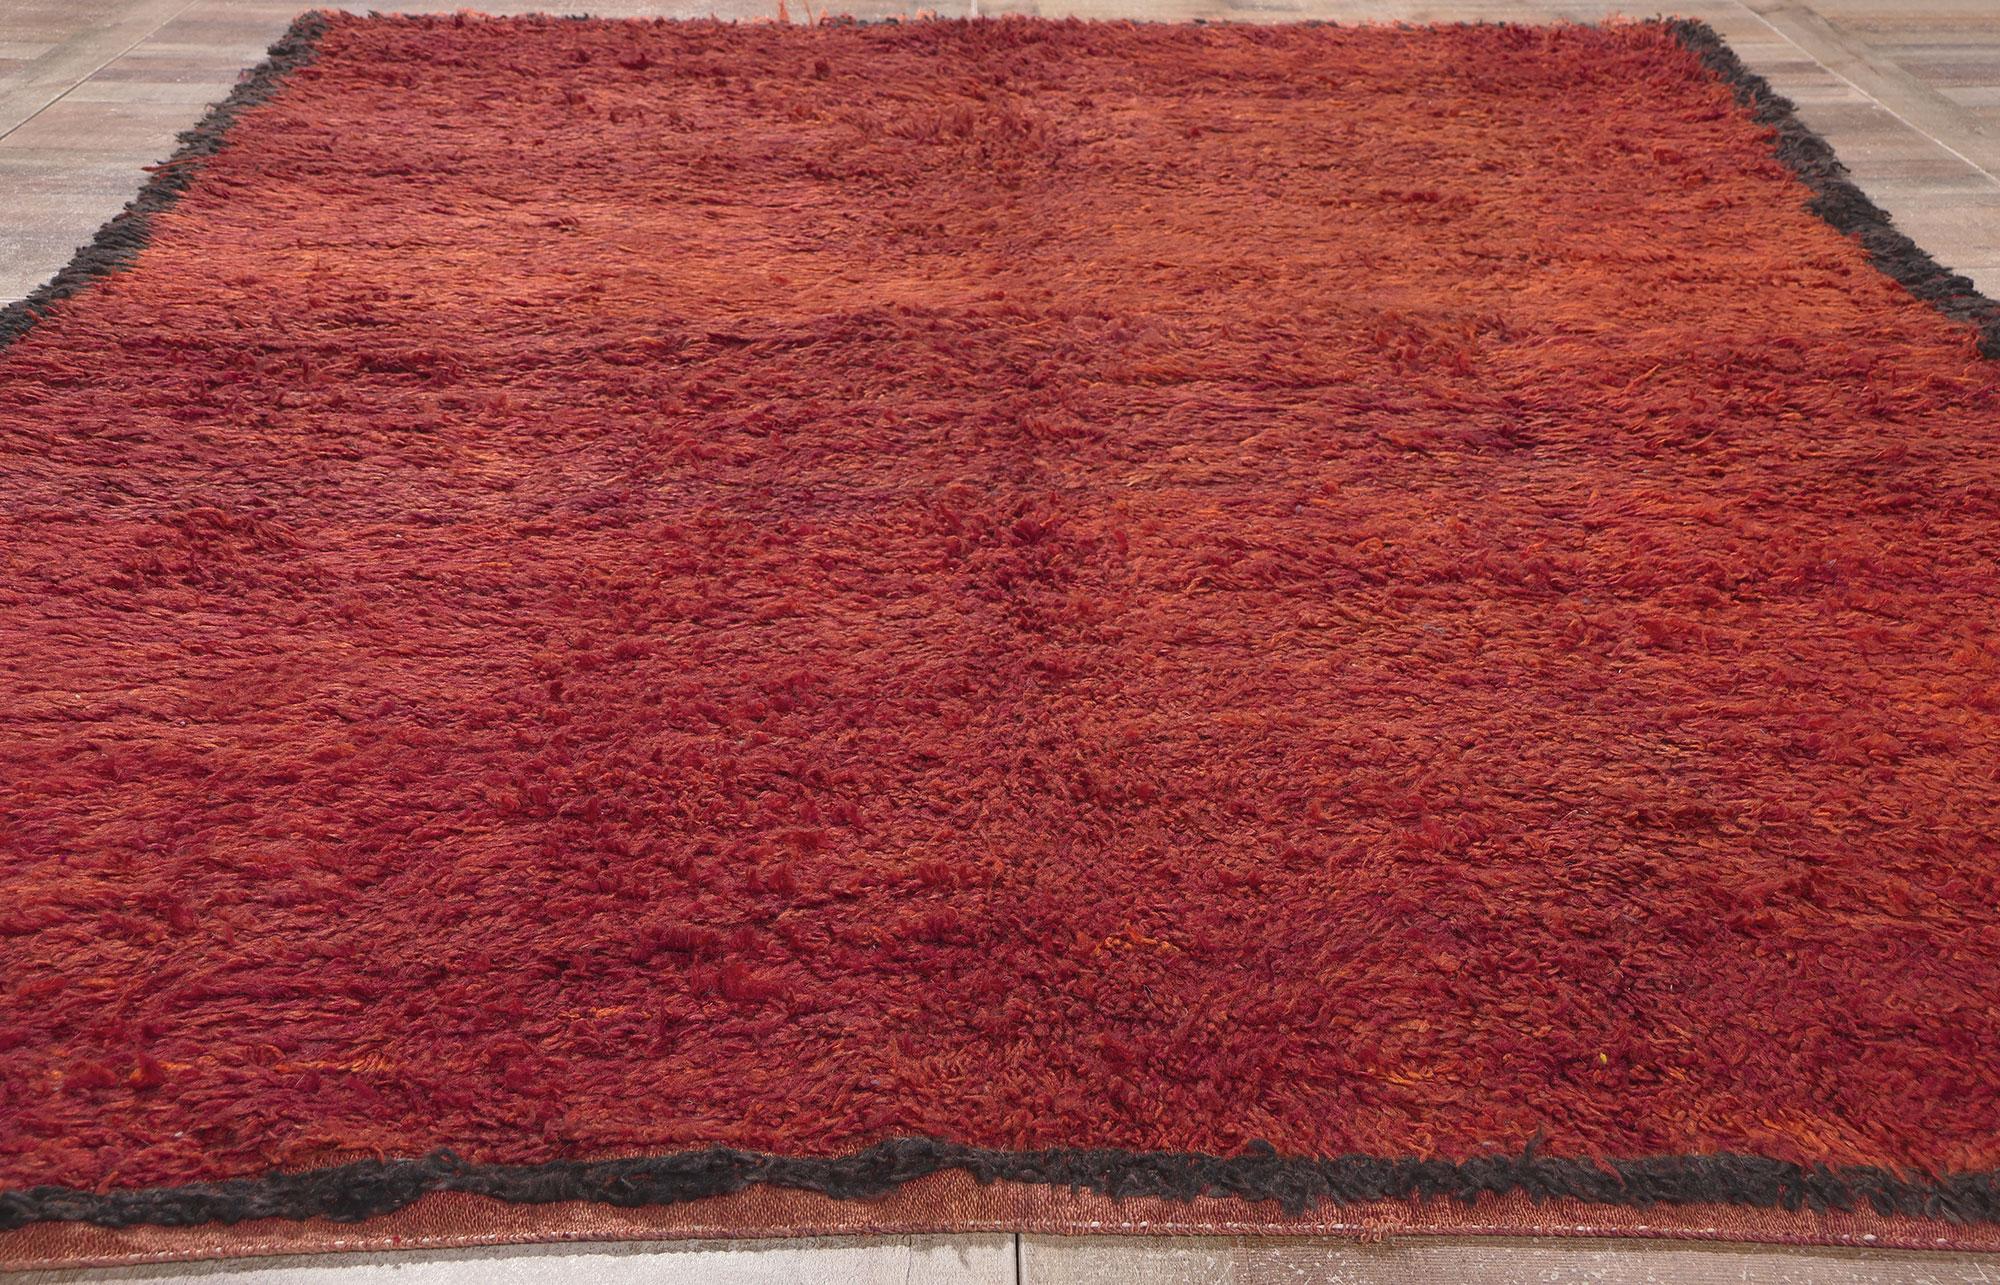 Vintage Red Beni Mrirt Moroccan Rug, Cozy Nomad Meets Abstract Expressionism For Sale 1